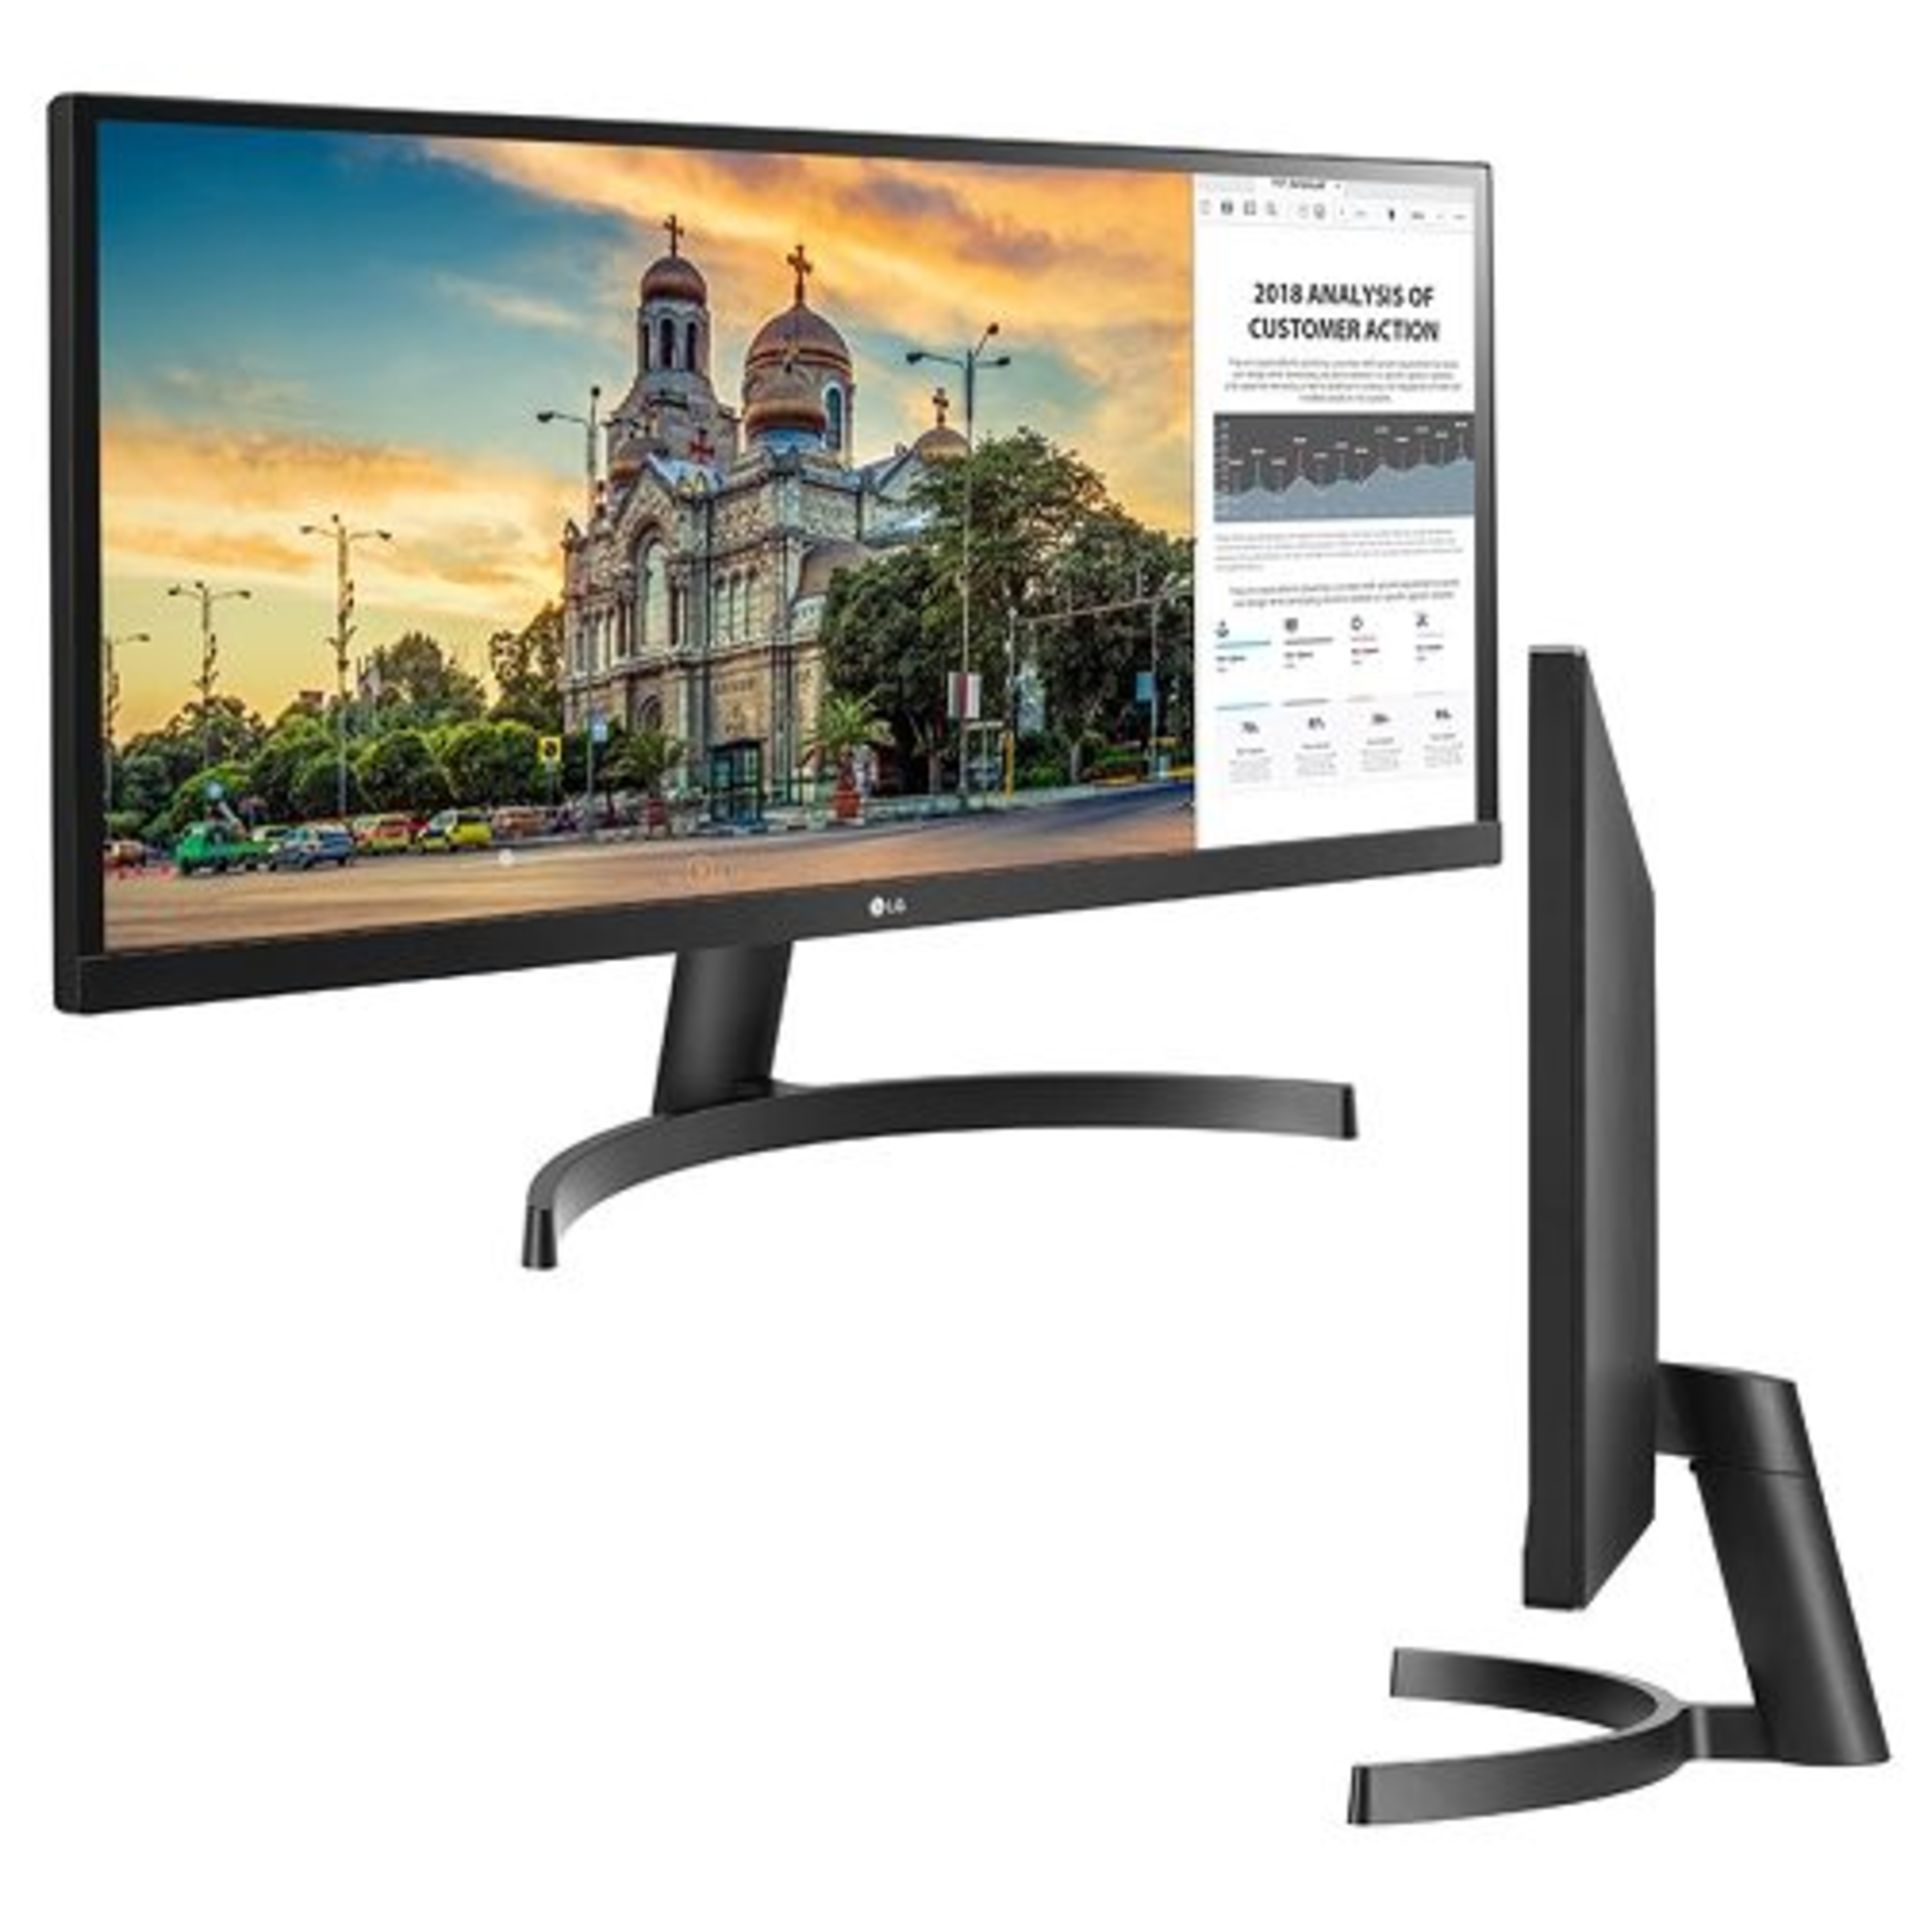 V Grade A LG 29 Inch ULTRA WIDE FULL HD IPS LED MONITOR - HDMI X 2 - Model Number 29WK500-P